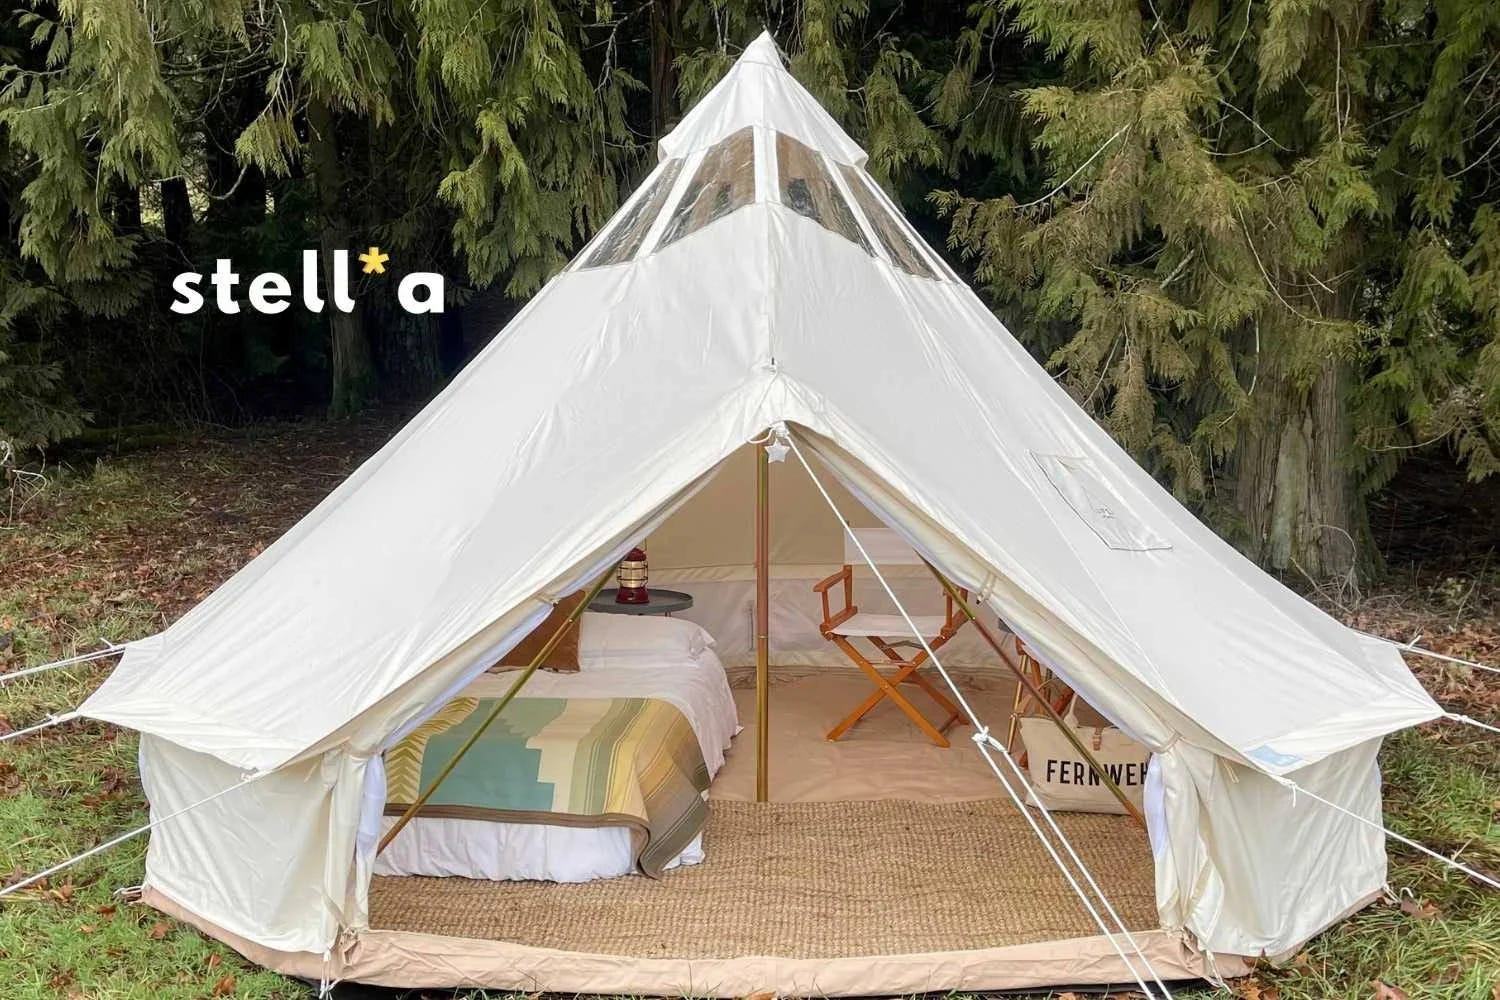 Enjoy the Starry Night with the Stella Stargazing Gazelle Tent | Image